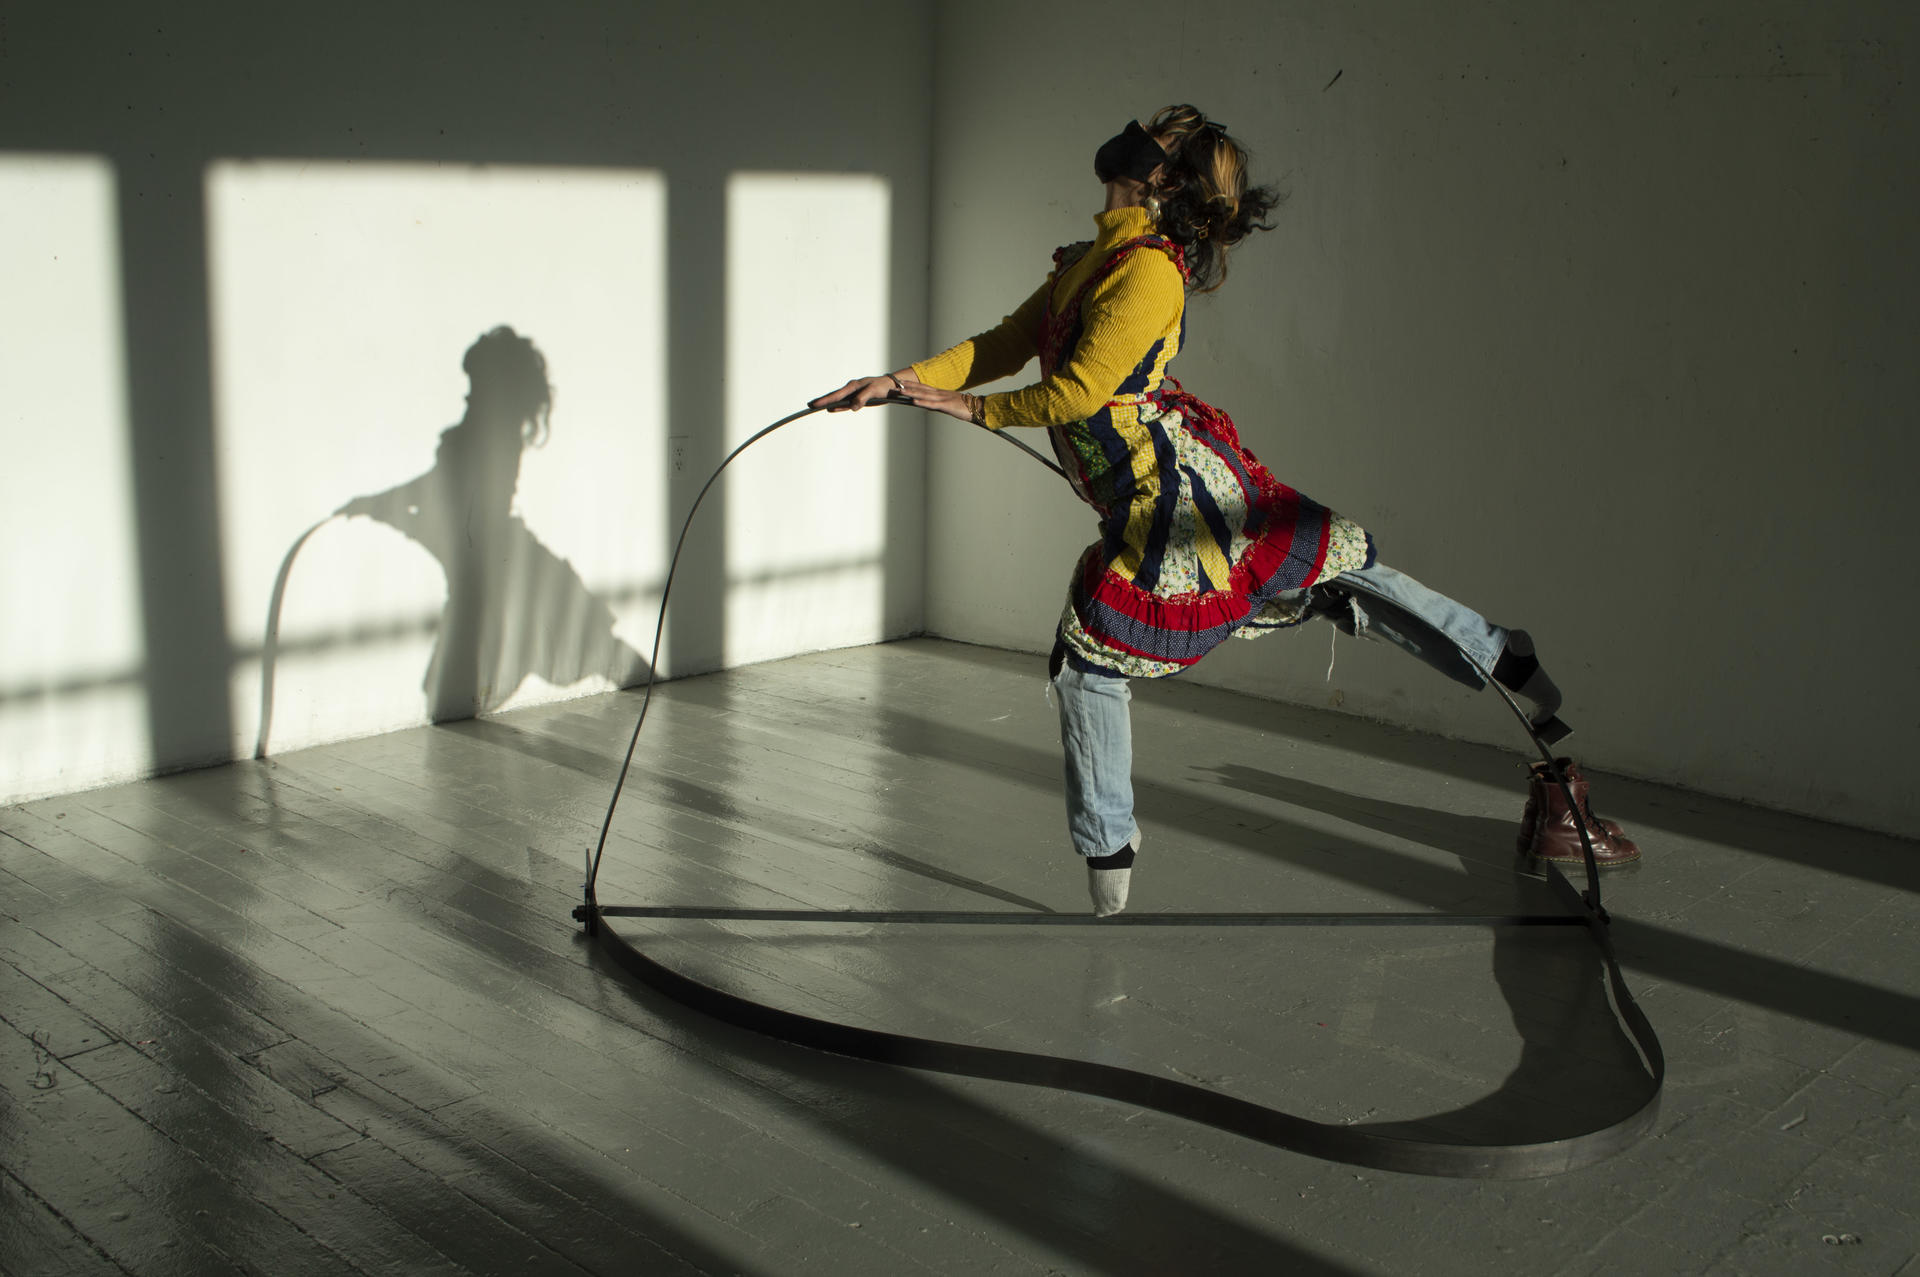 A person with dark hair and a colorful dress layered over jeans balances and dances atop a delicately bent steel beam.